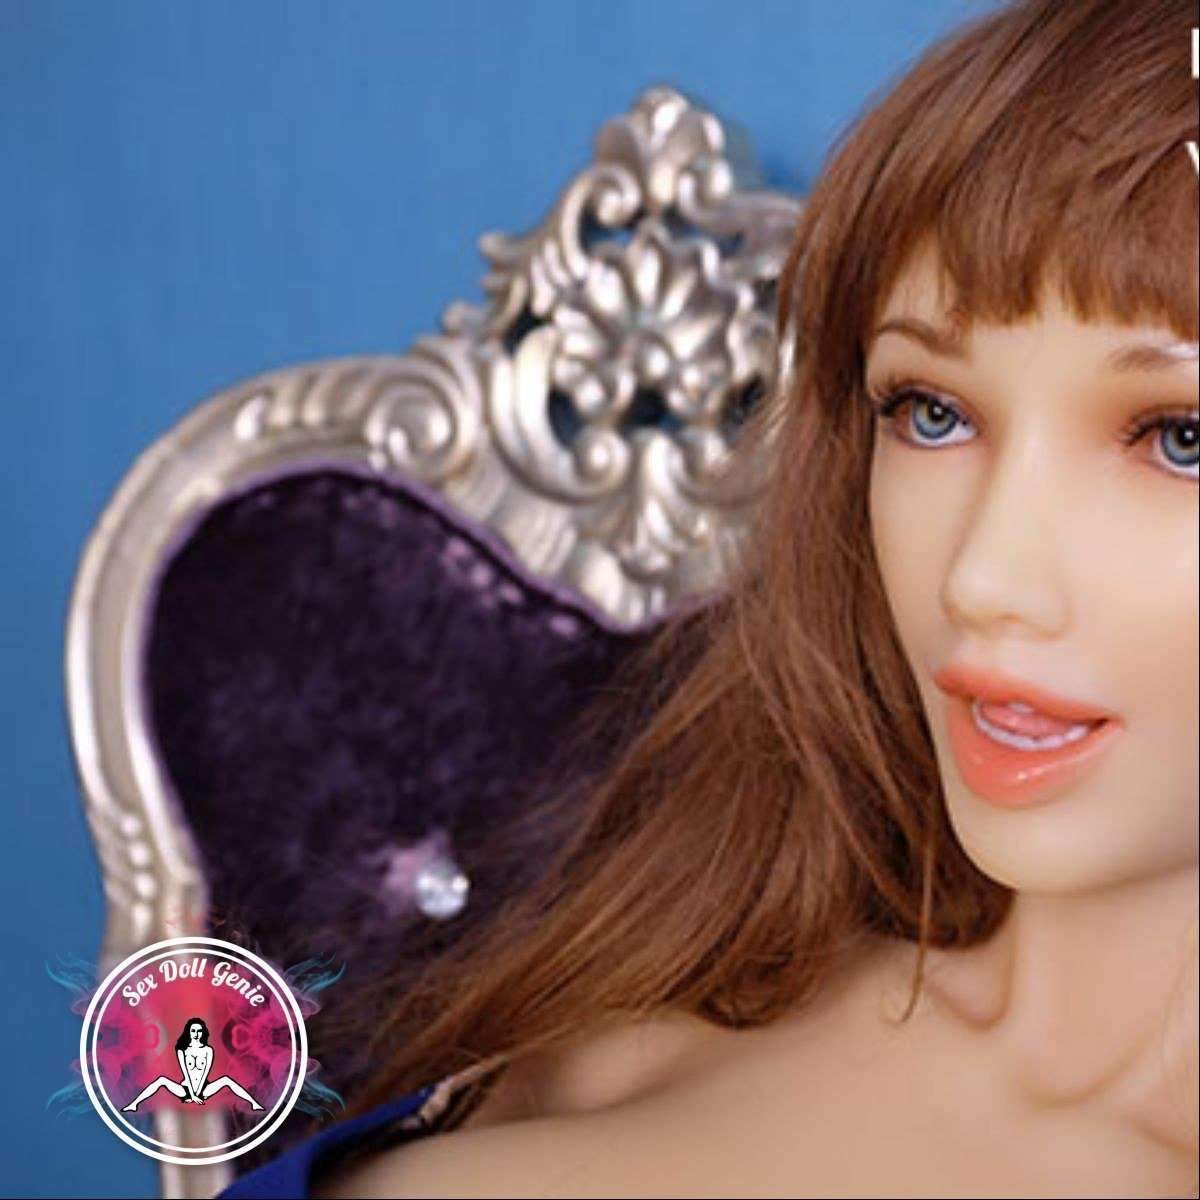 DS Doll - 158Plus - Penny Head - Type 1 D Cup Silicone Doll-13